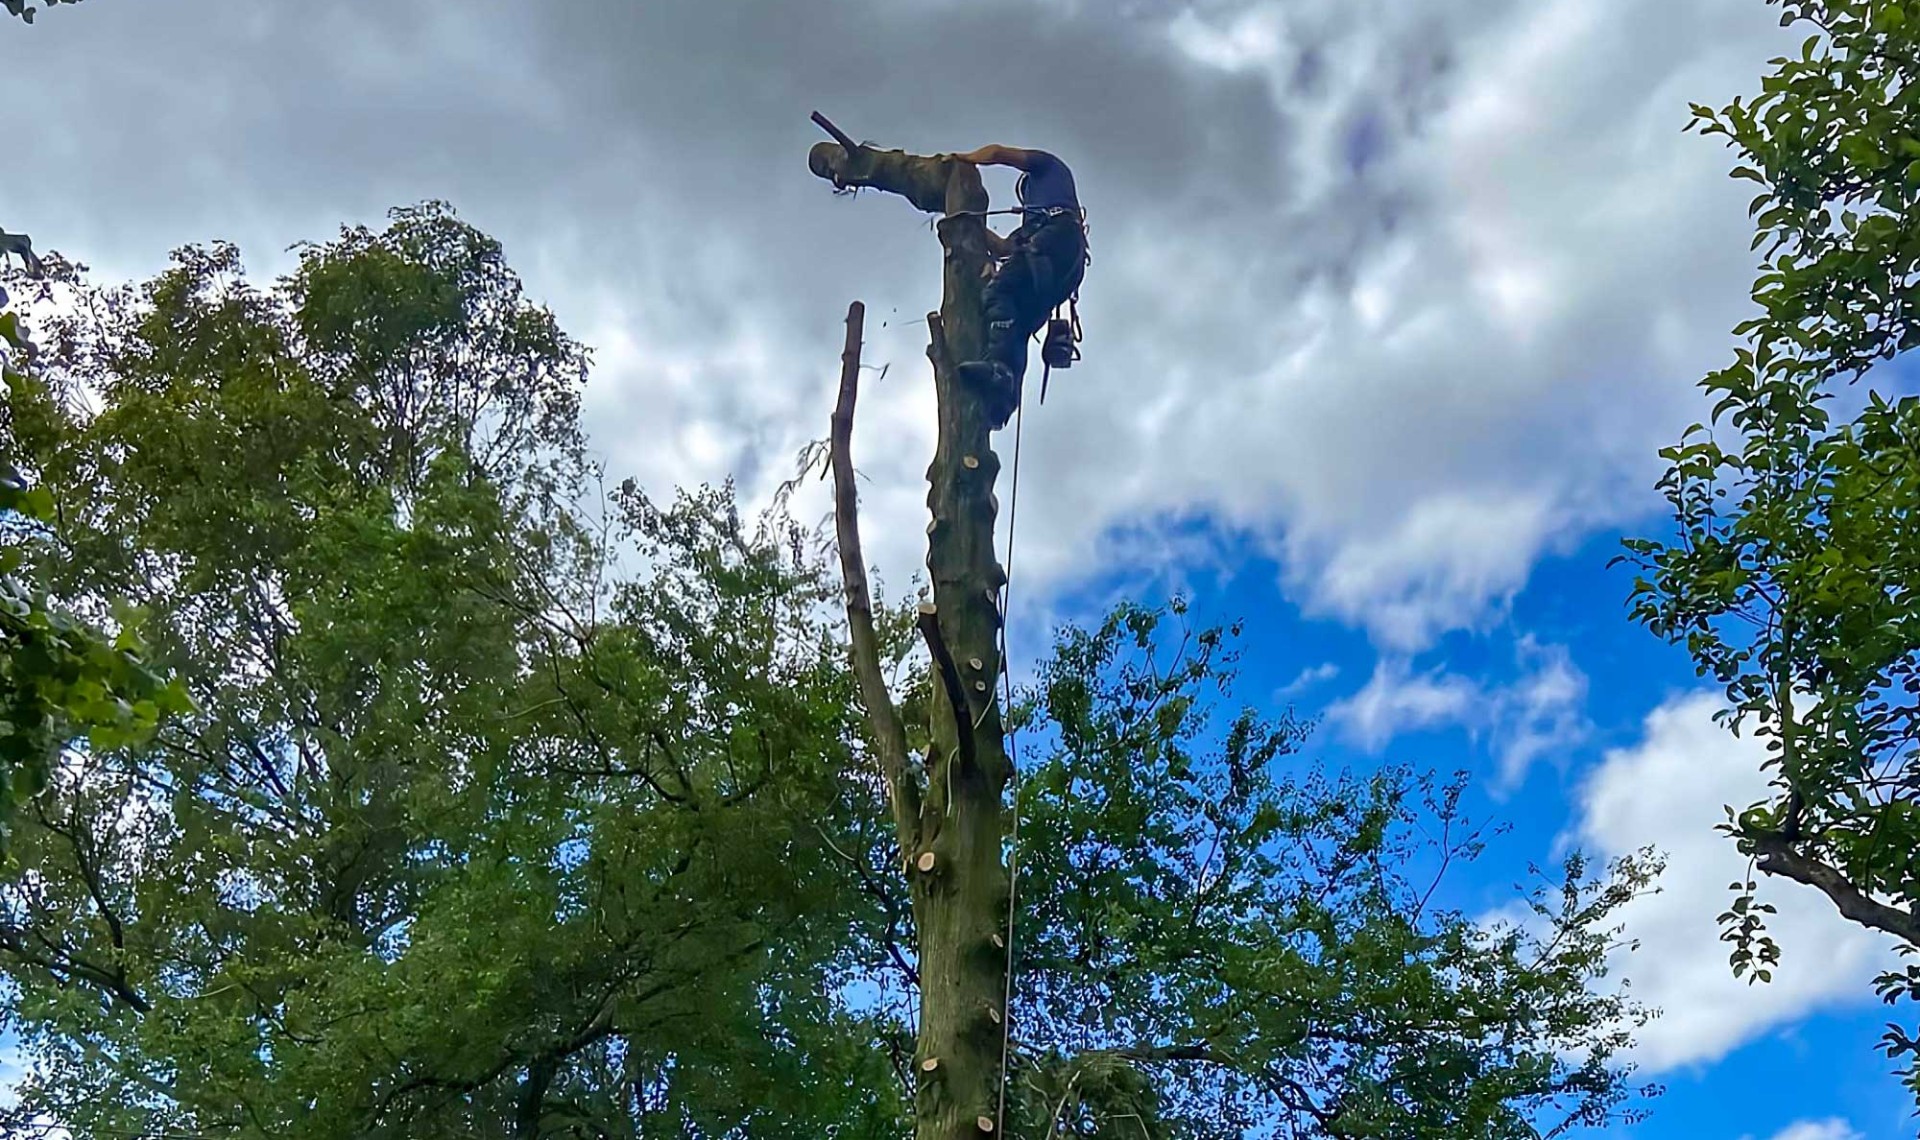 Tree surgeon at the top of a tree trunk dead wooding.